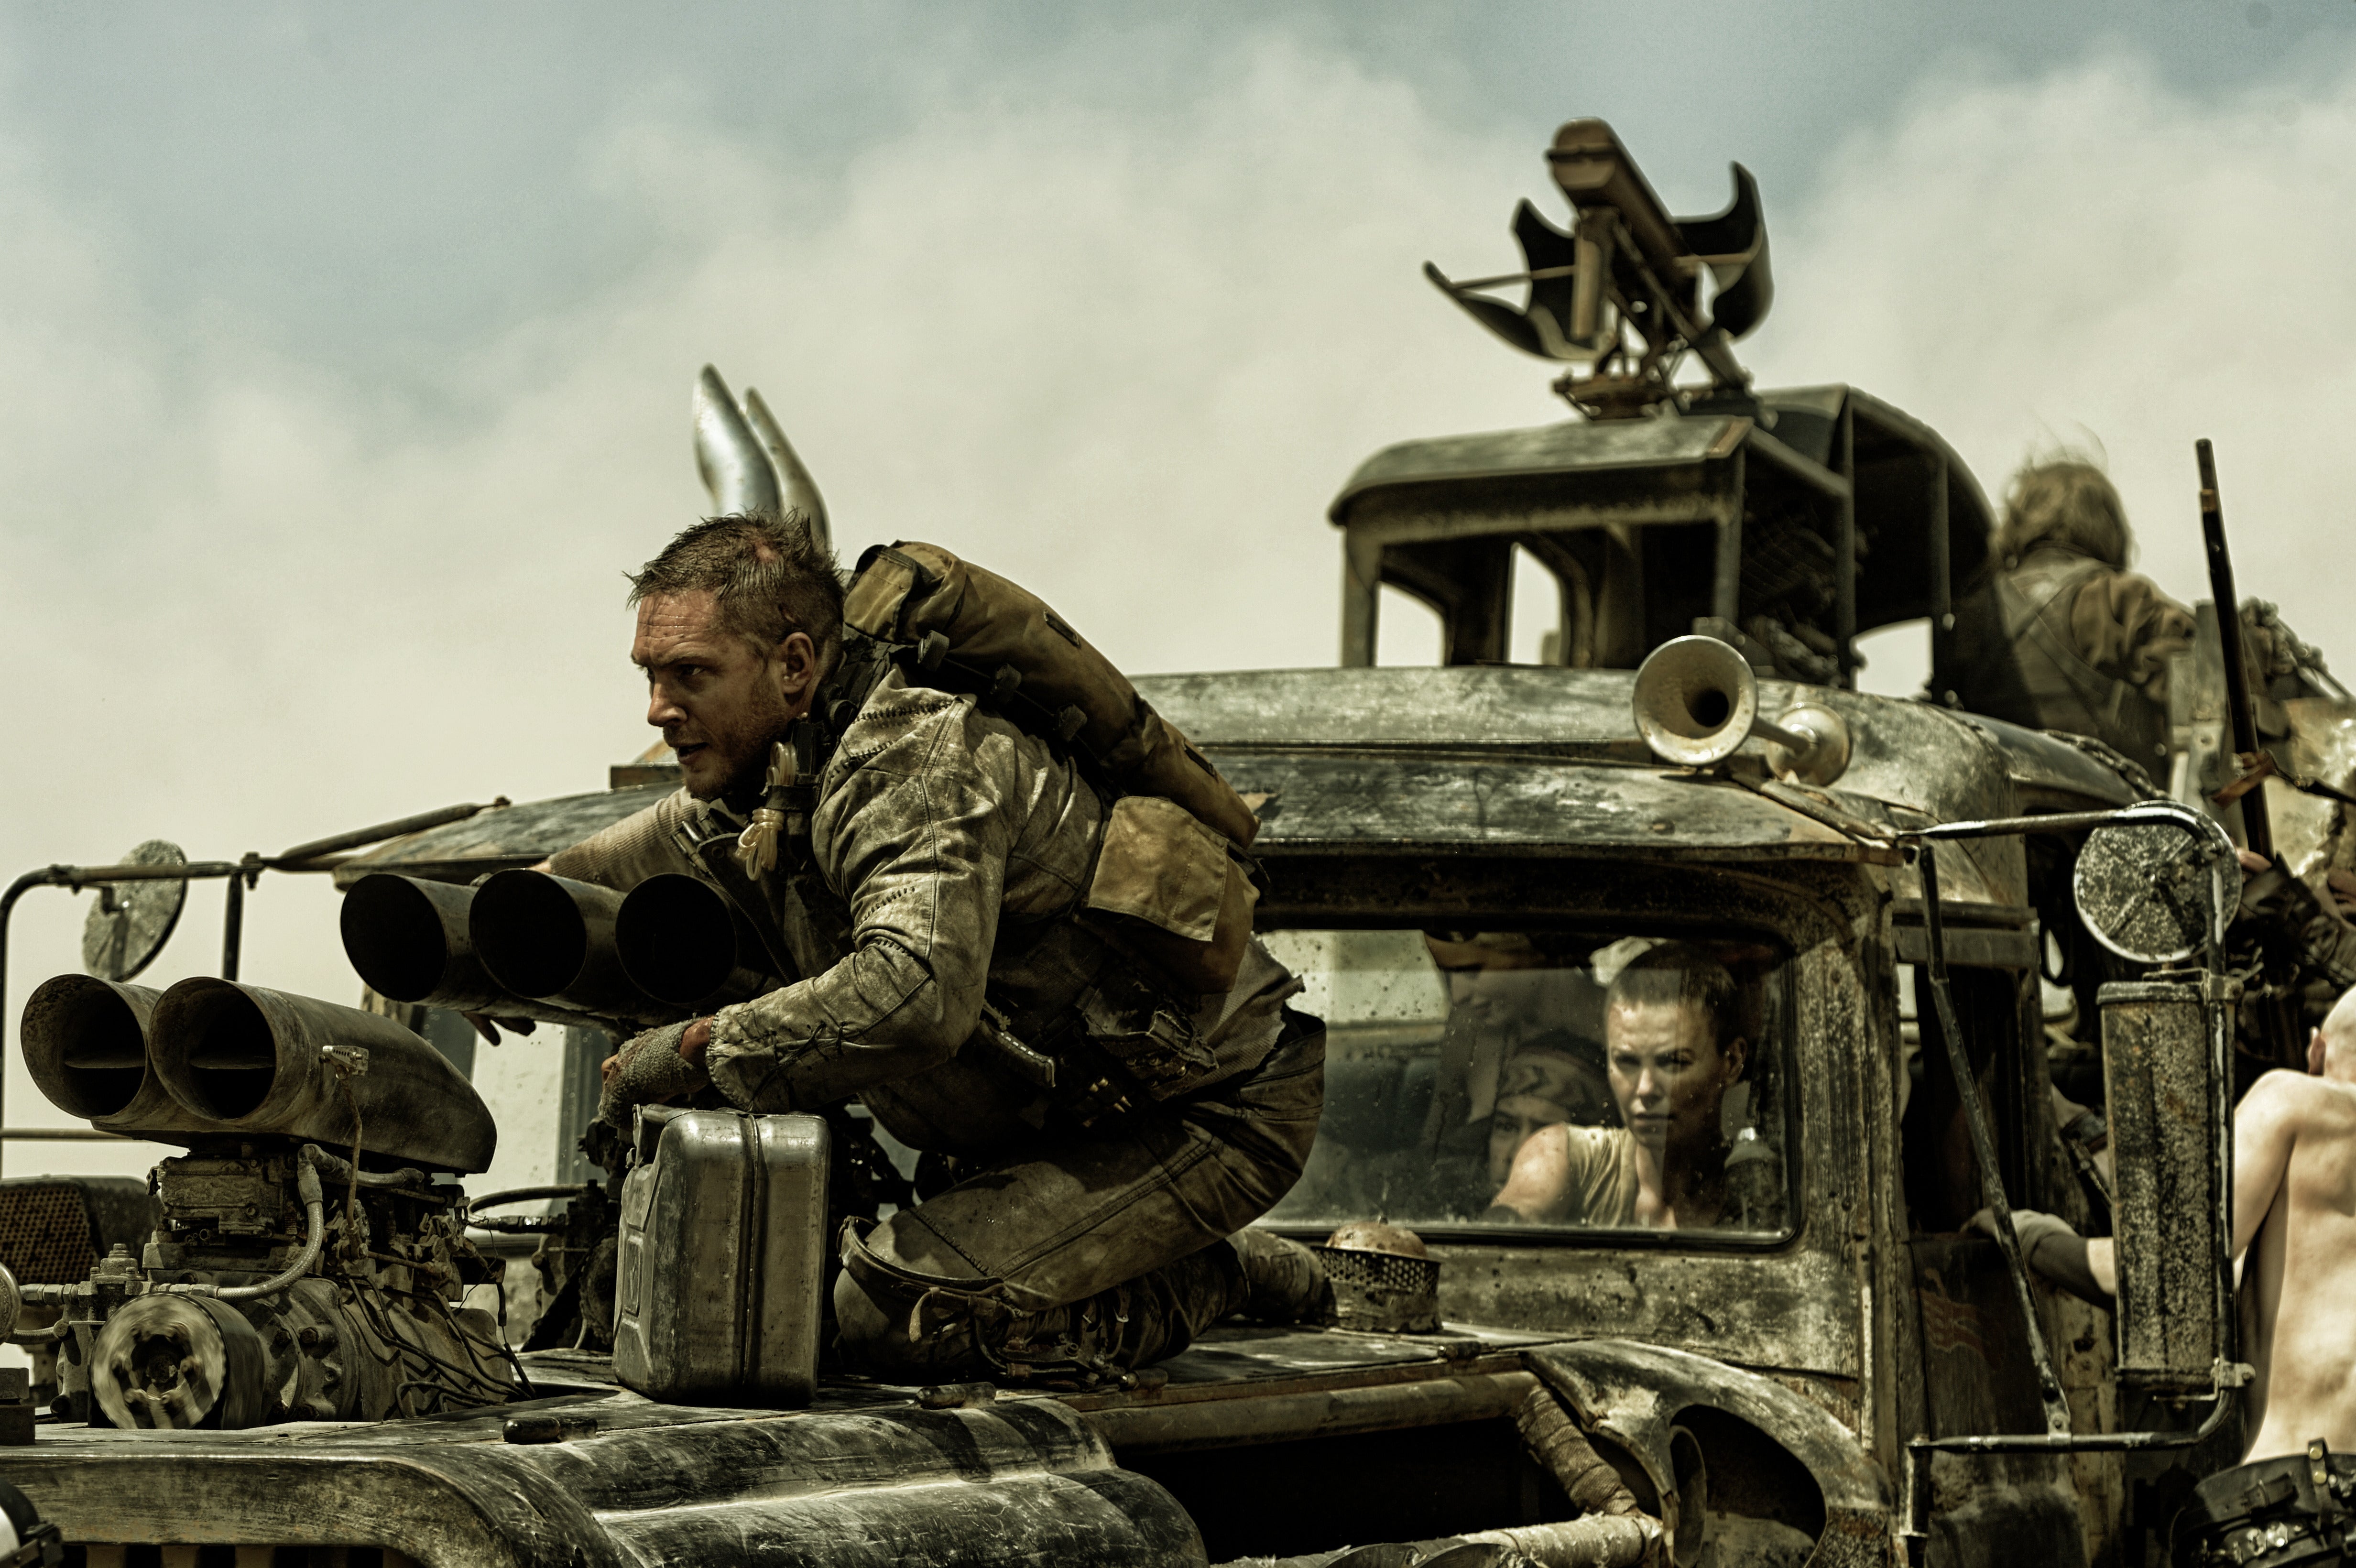 Tom Hardy in ‘Mad Max: Fury Road’